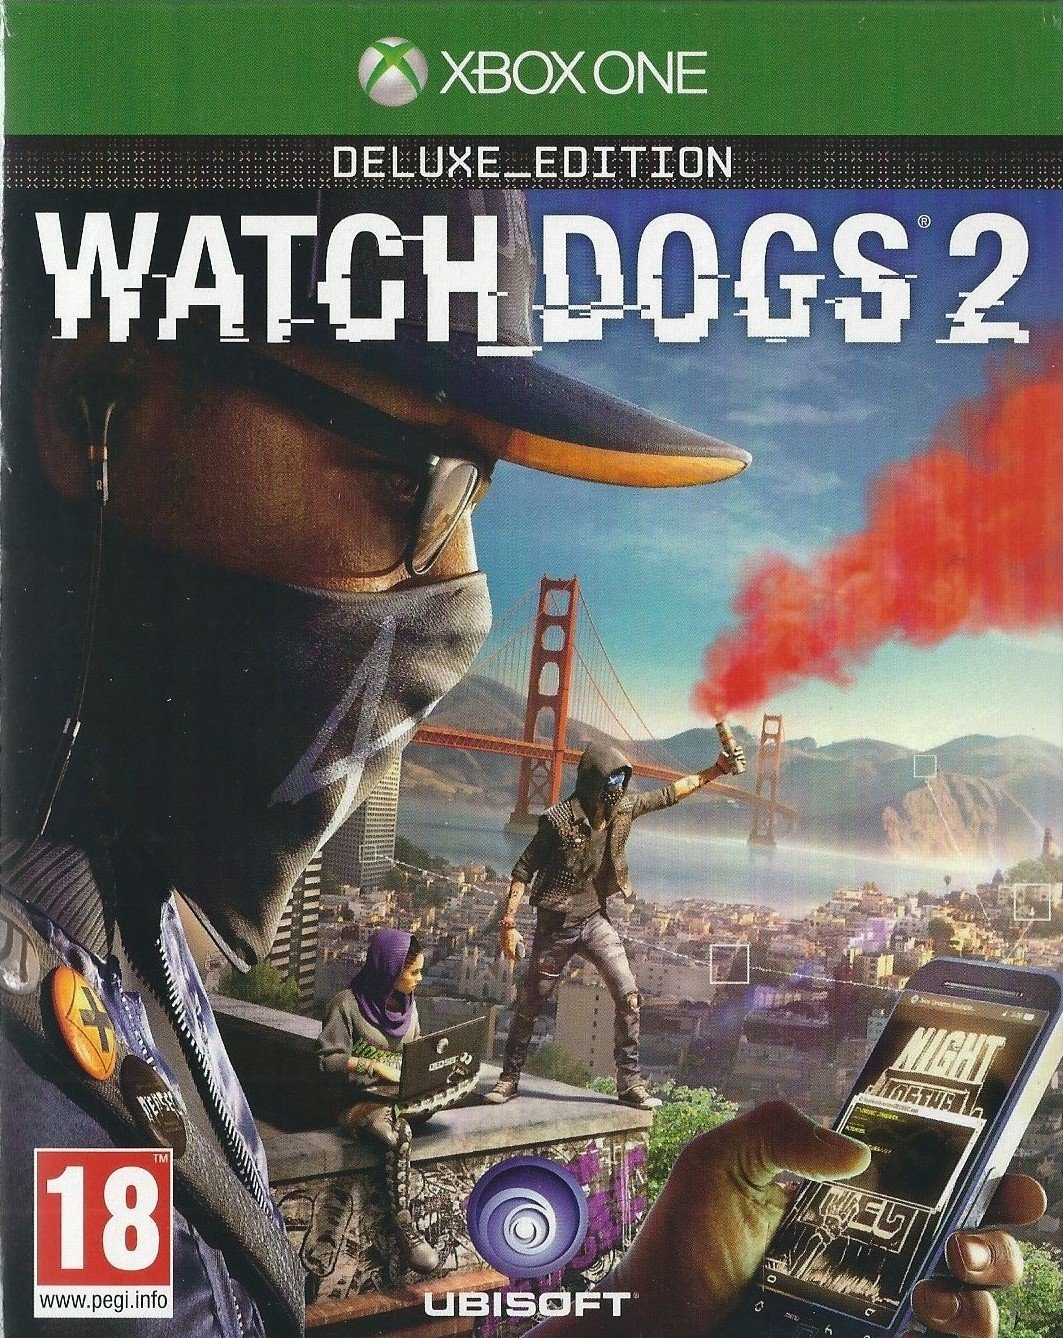 Buy Watch Dogs 2 Deluxe Edition